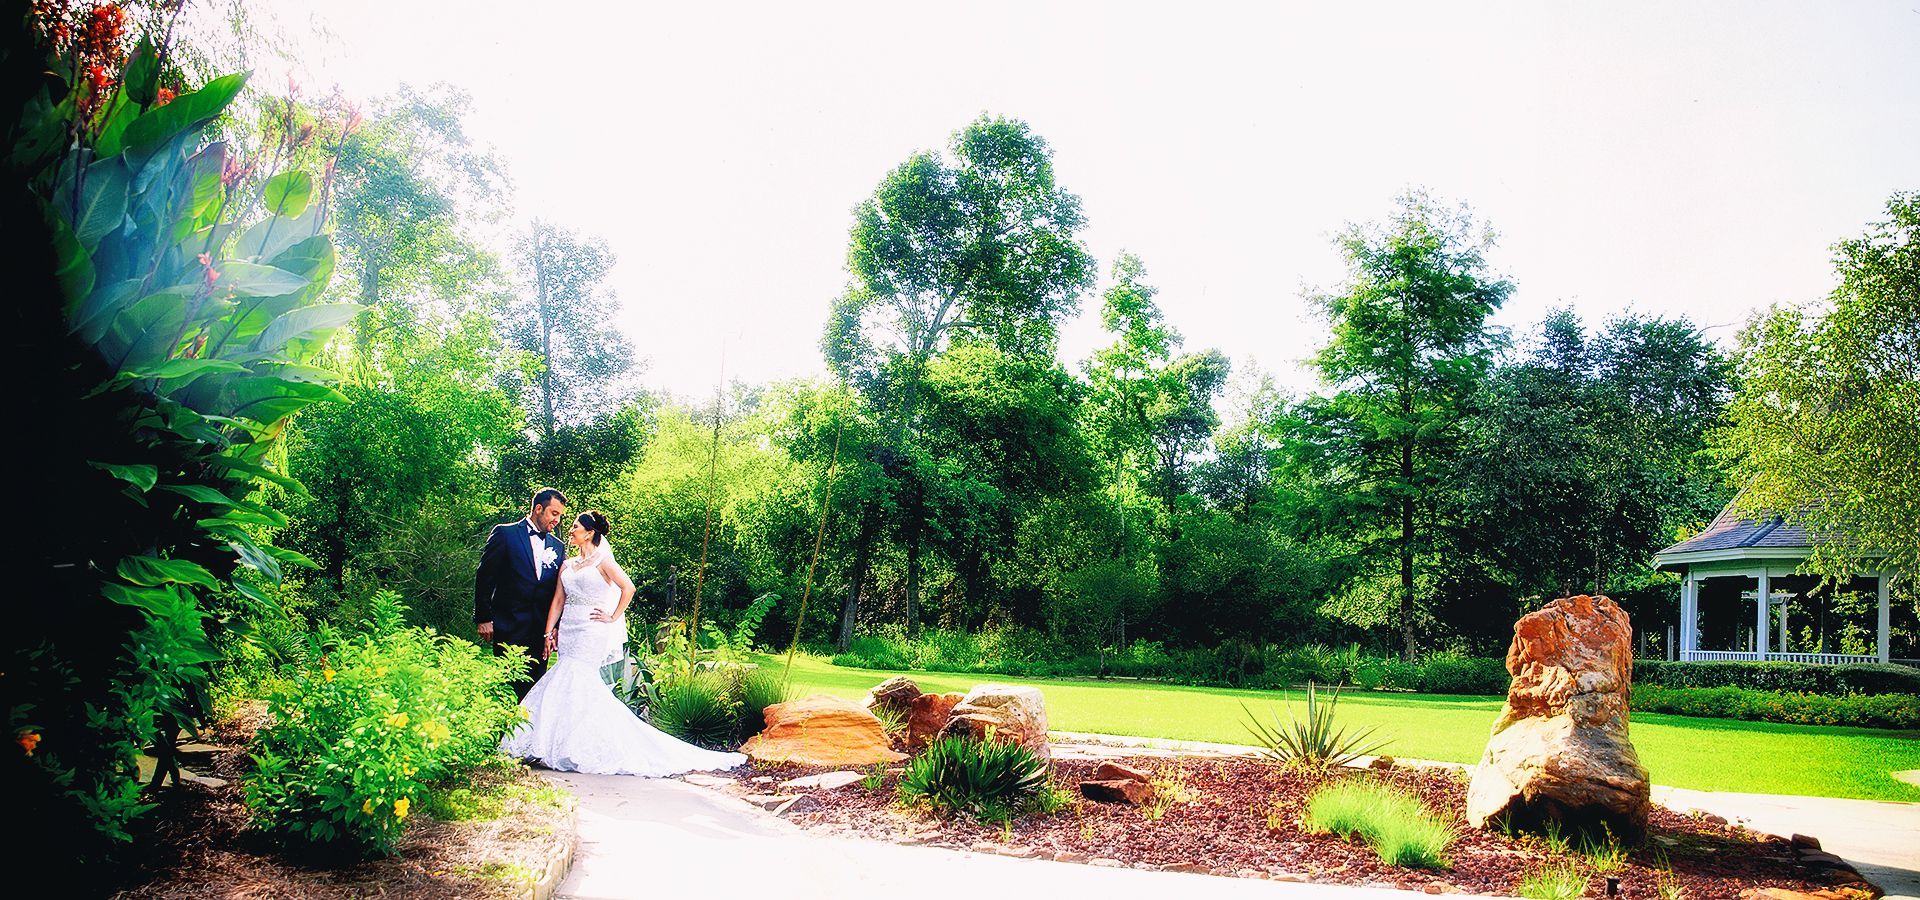 Wedding-The-Event-Centre-in-Beaumont, Texas by Marin Fotografia y Video - Wedding-Photographer